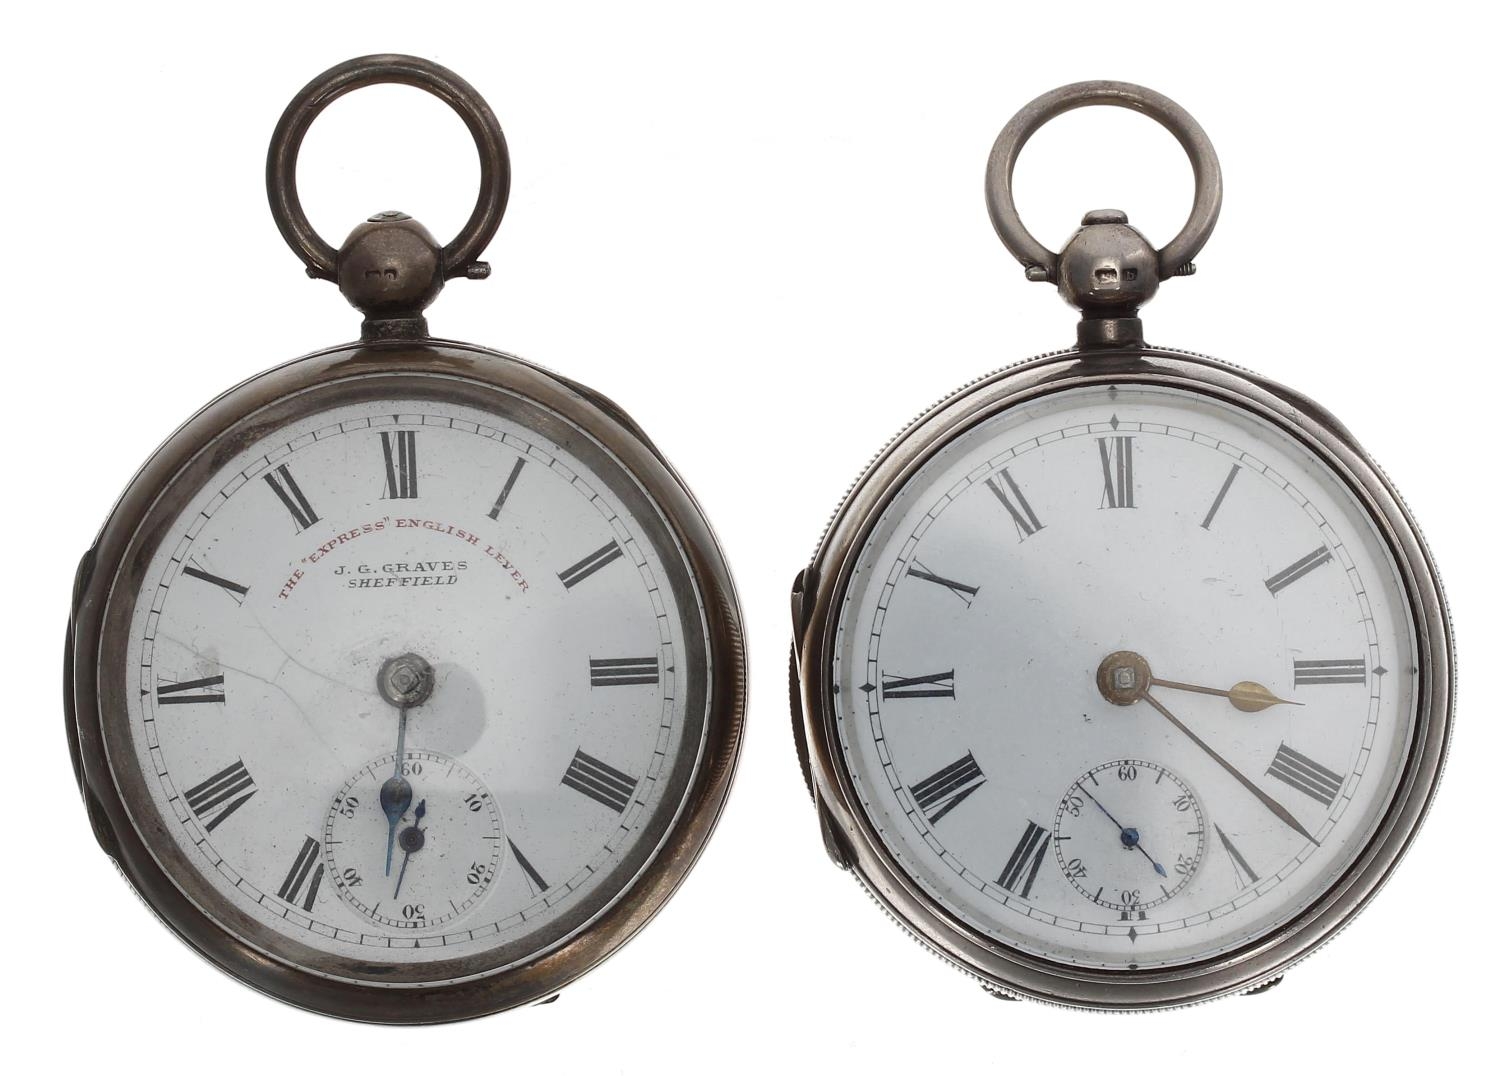 J.G. Graves, Sheffield 'The ''Express'' English Lever' silver engine turned pocket watch in need